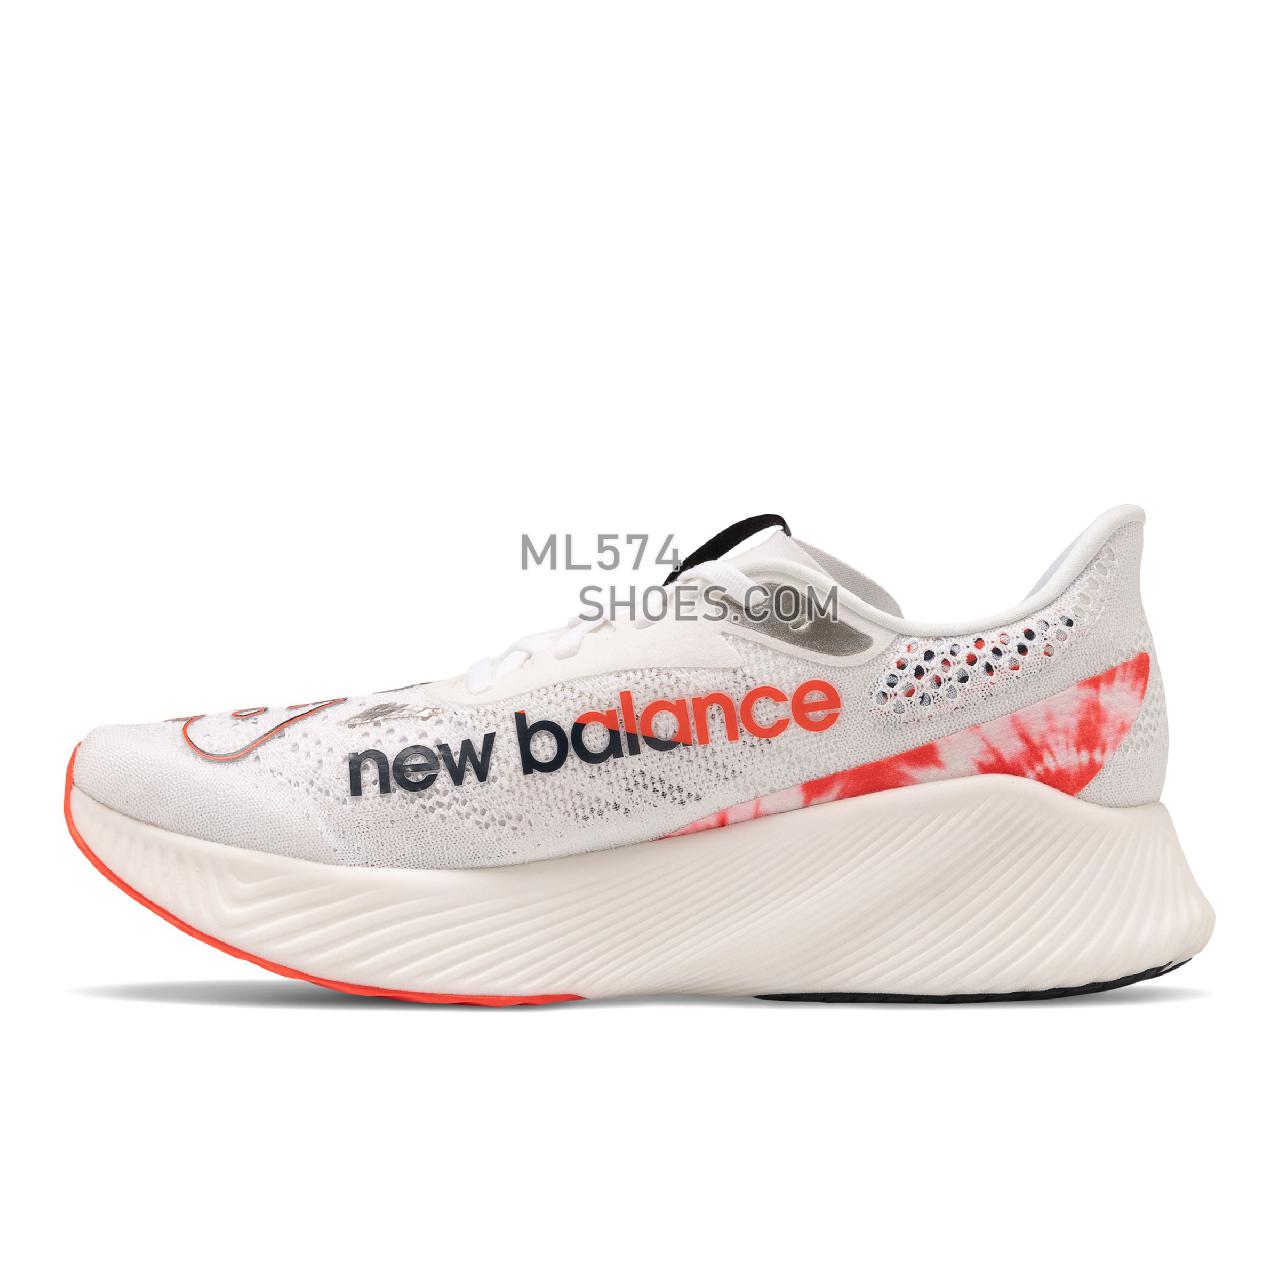 New Balance FuelCell RC Elite v2 - Women's Fuelcell Sleek And LightWeight - White with Neo Flame - WRCELZ2